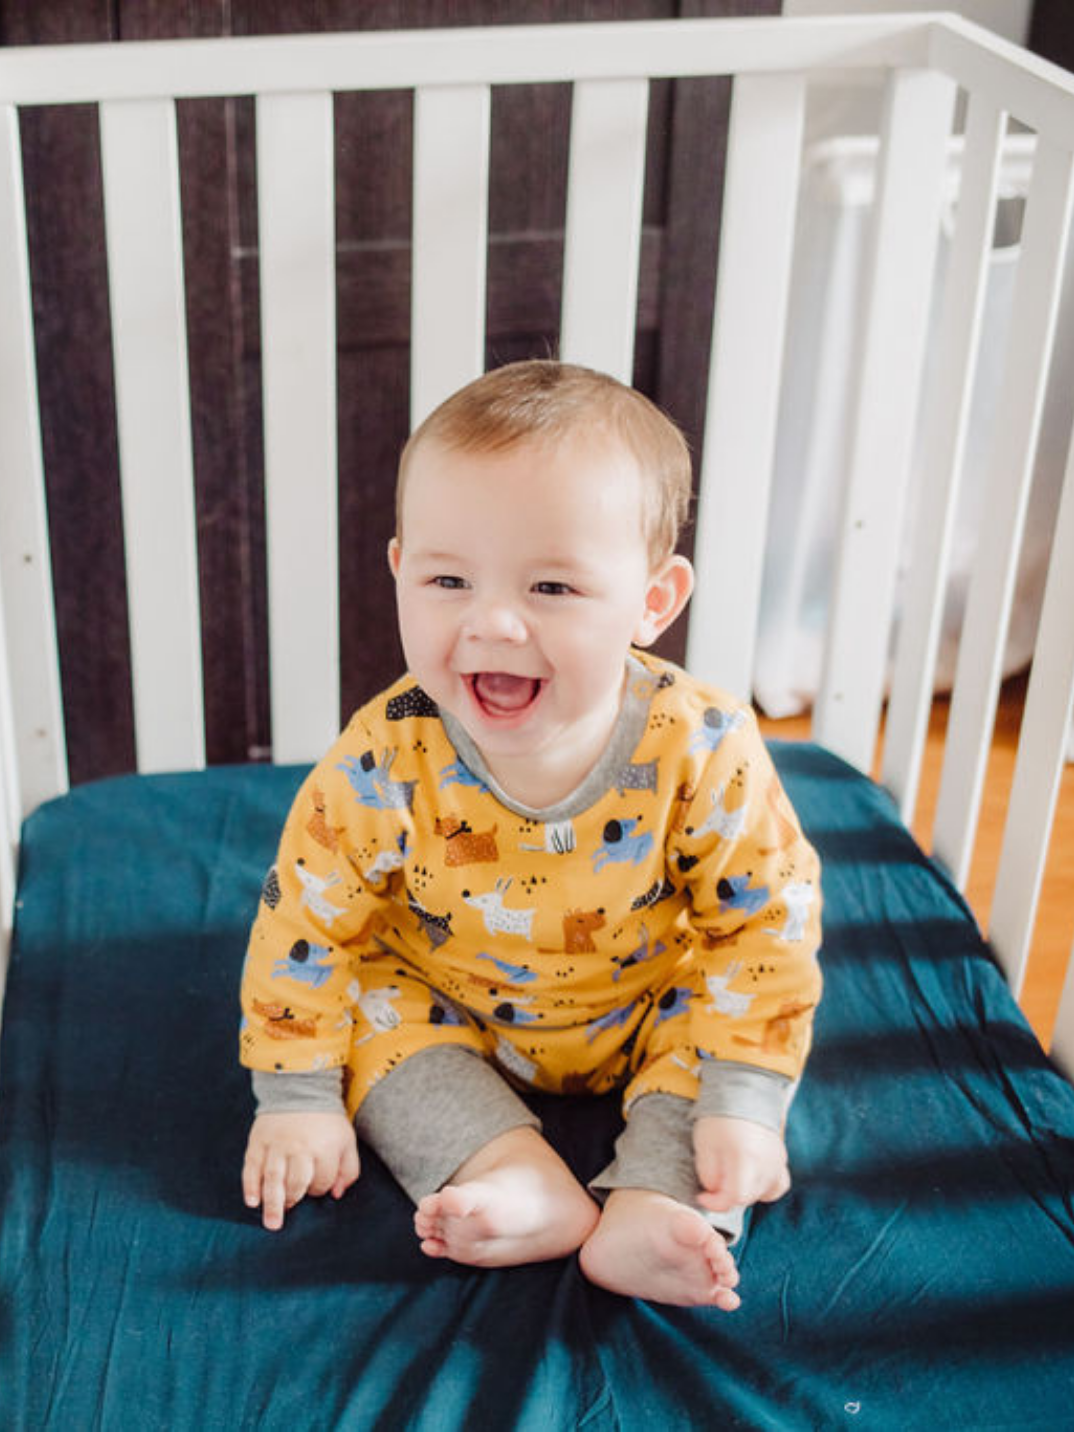 This happy little reversible playtime jumper and matching pants and bib set will put a smile on your face and brighten the day for any baby. Whether you're a dog or cat person, there is one for everyone!